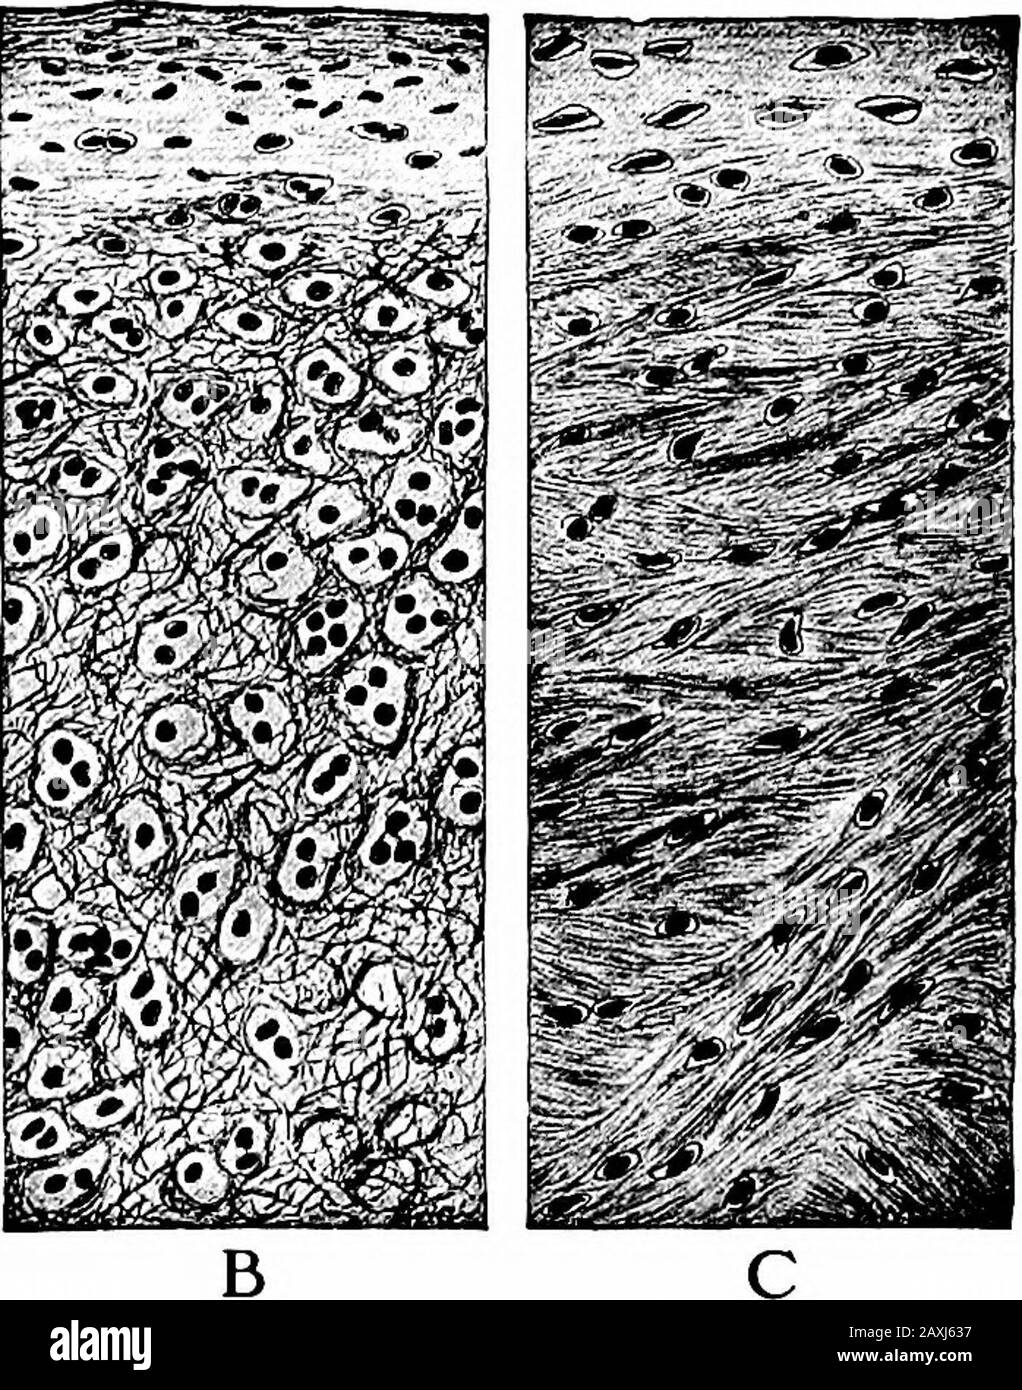 A manual of anatomy . Fig. 79.—Sections of cartilage. A, Hyalin cartilage, a. Fibrous layer of peri-chondrium; b, genetic layer of perichondrium; c, youngest chondroblasts; d, older chondro-blasts; e, capsule; /, cells; g, lacuna. B, Elastic cartilage. C, White fibro-cartilage.(Radaschs Histology.) Fibrocartilage is found as the intervertebral discs, interarticularcartilages and deepening joint cavities. It may calcify in old age. Elastic cartilage does not concern us here. Ligaments are those bands of dense white fibrous tissue that holdthe bones together. They resemble the fasciae in structu Stock Photo